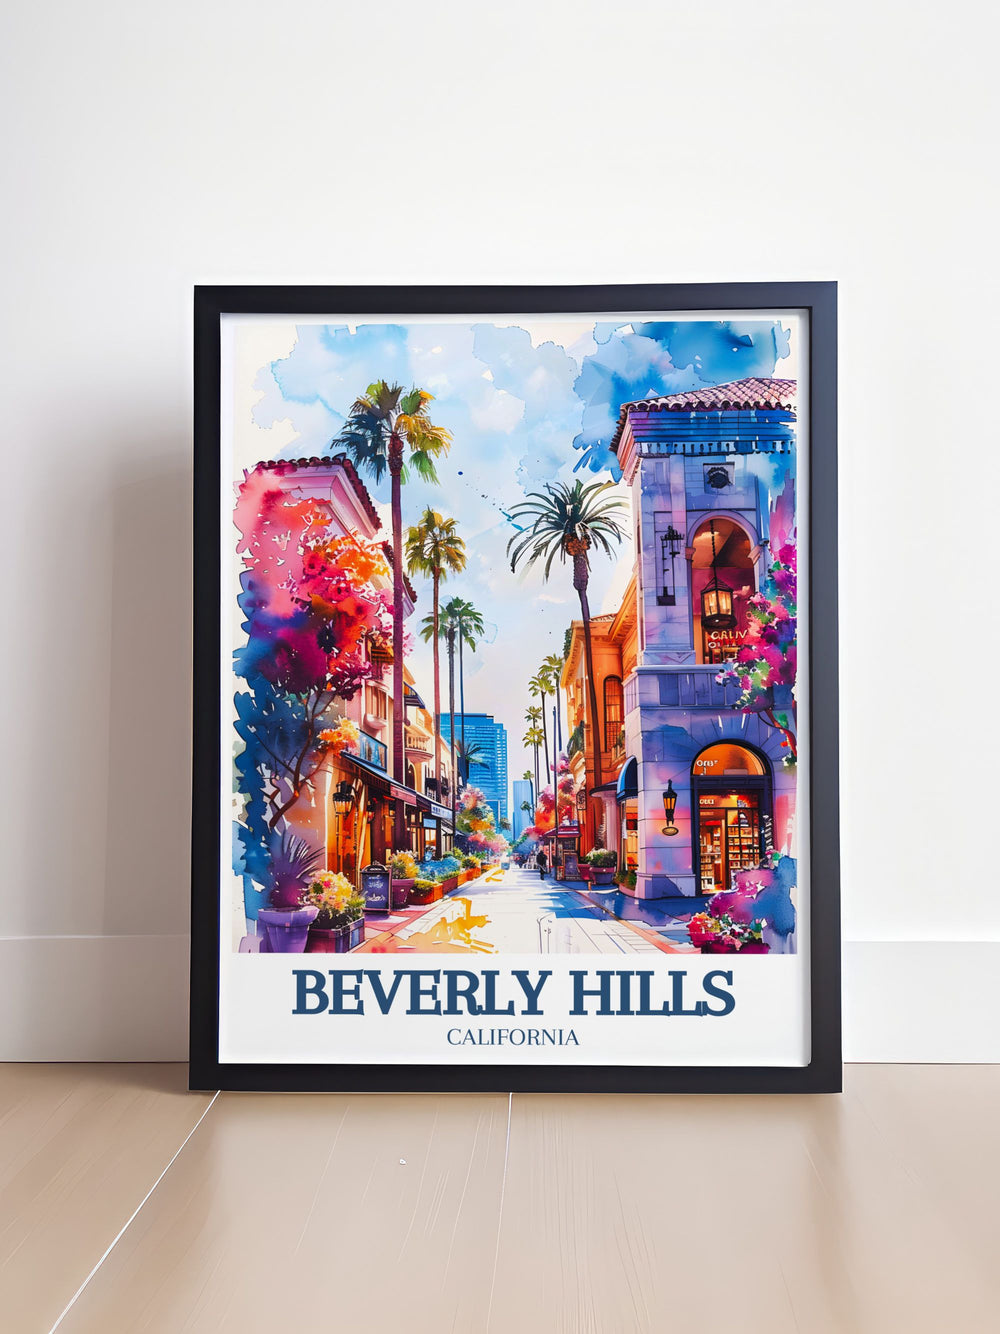 Beautiful California print highlighting the vibrant energy of Rodeo Drive and the refined atmosphere of Three Rodeo Drive, ideal for fashion enthusiasts and those who appreciate elegance. Adds a stylish touch to your home decor.